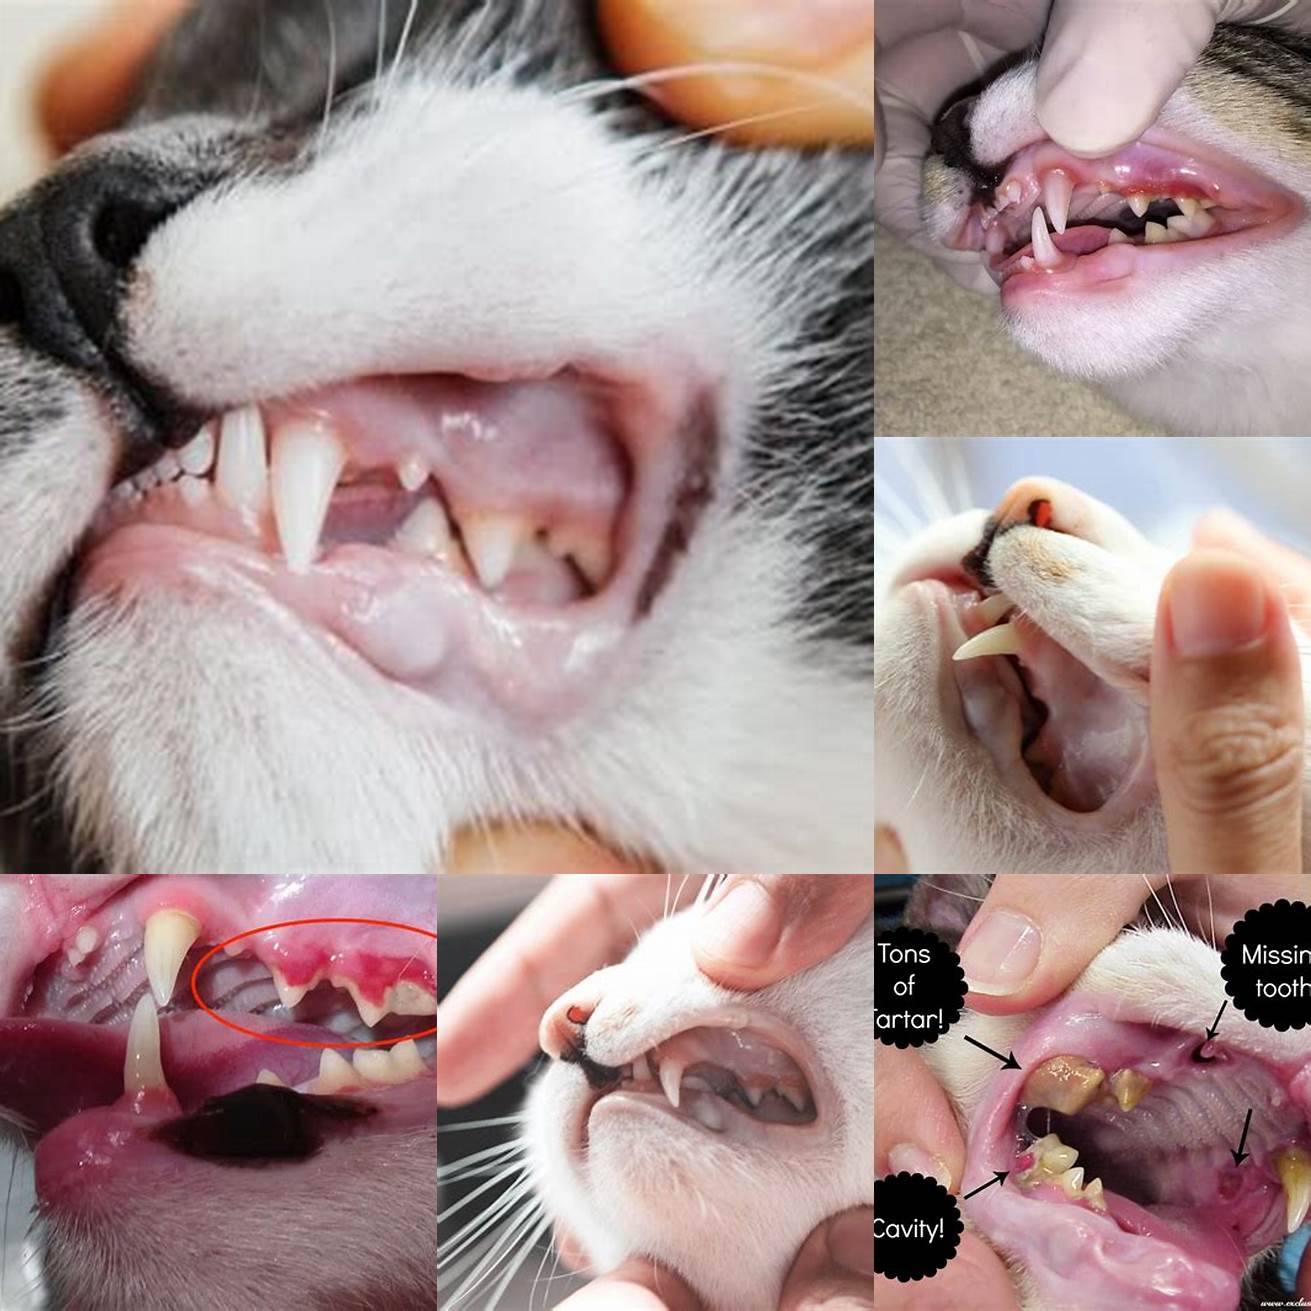 Cat with dental issues